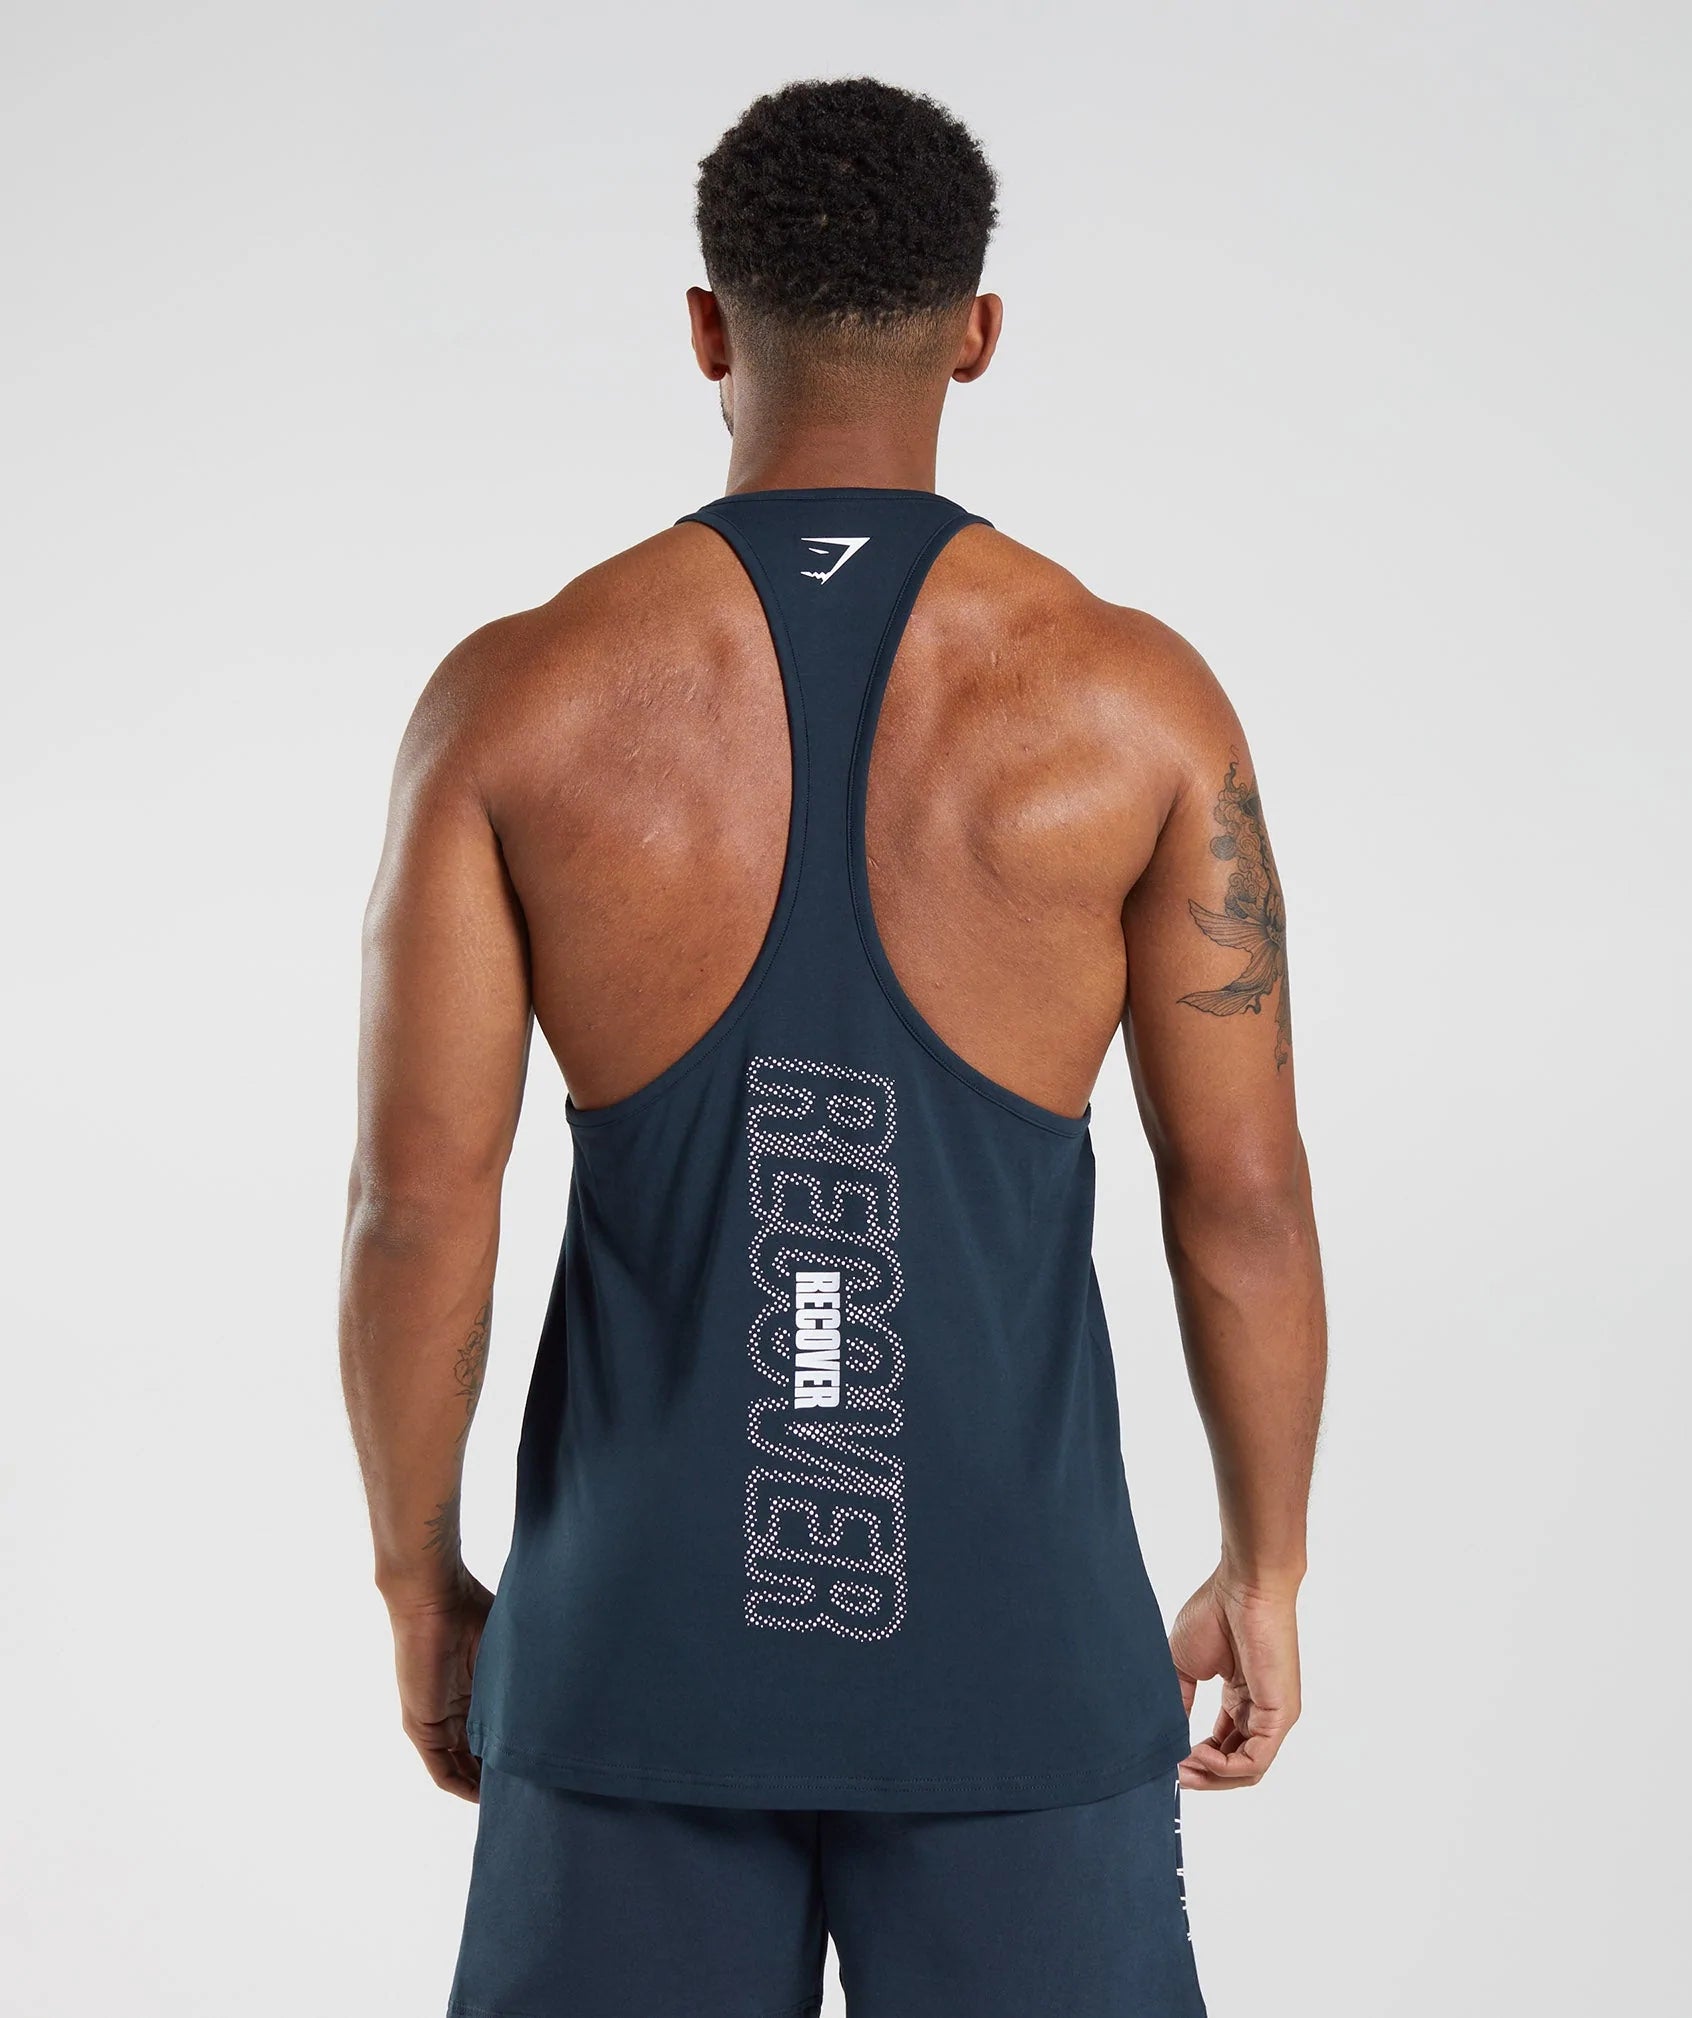 Recovery Graphic Stringer in Navy - view 1